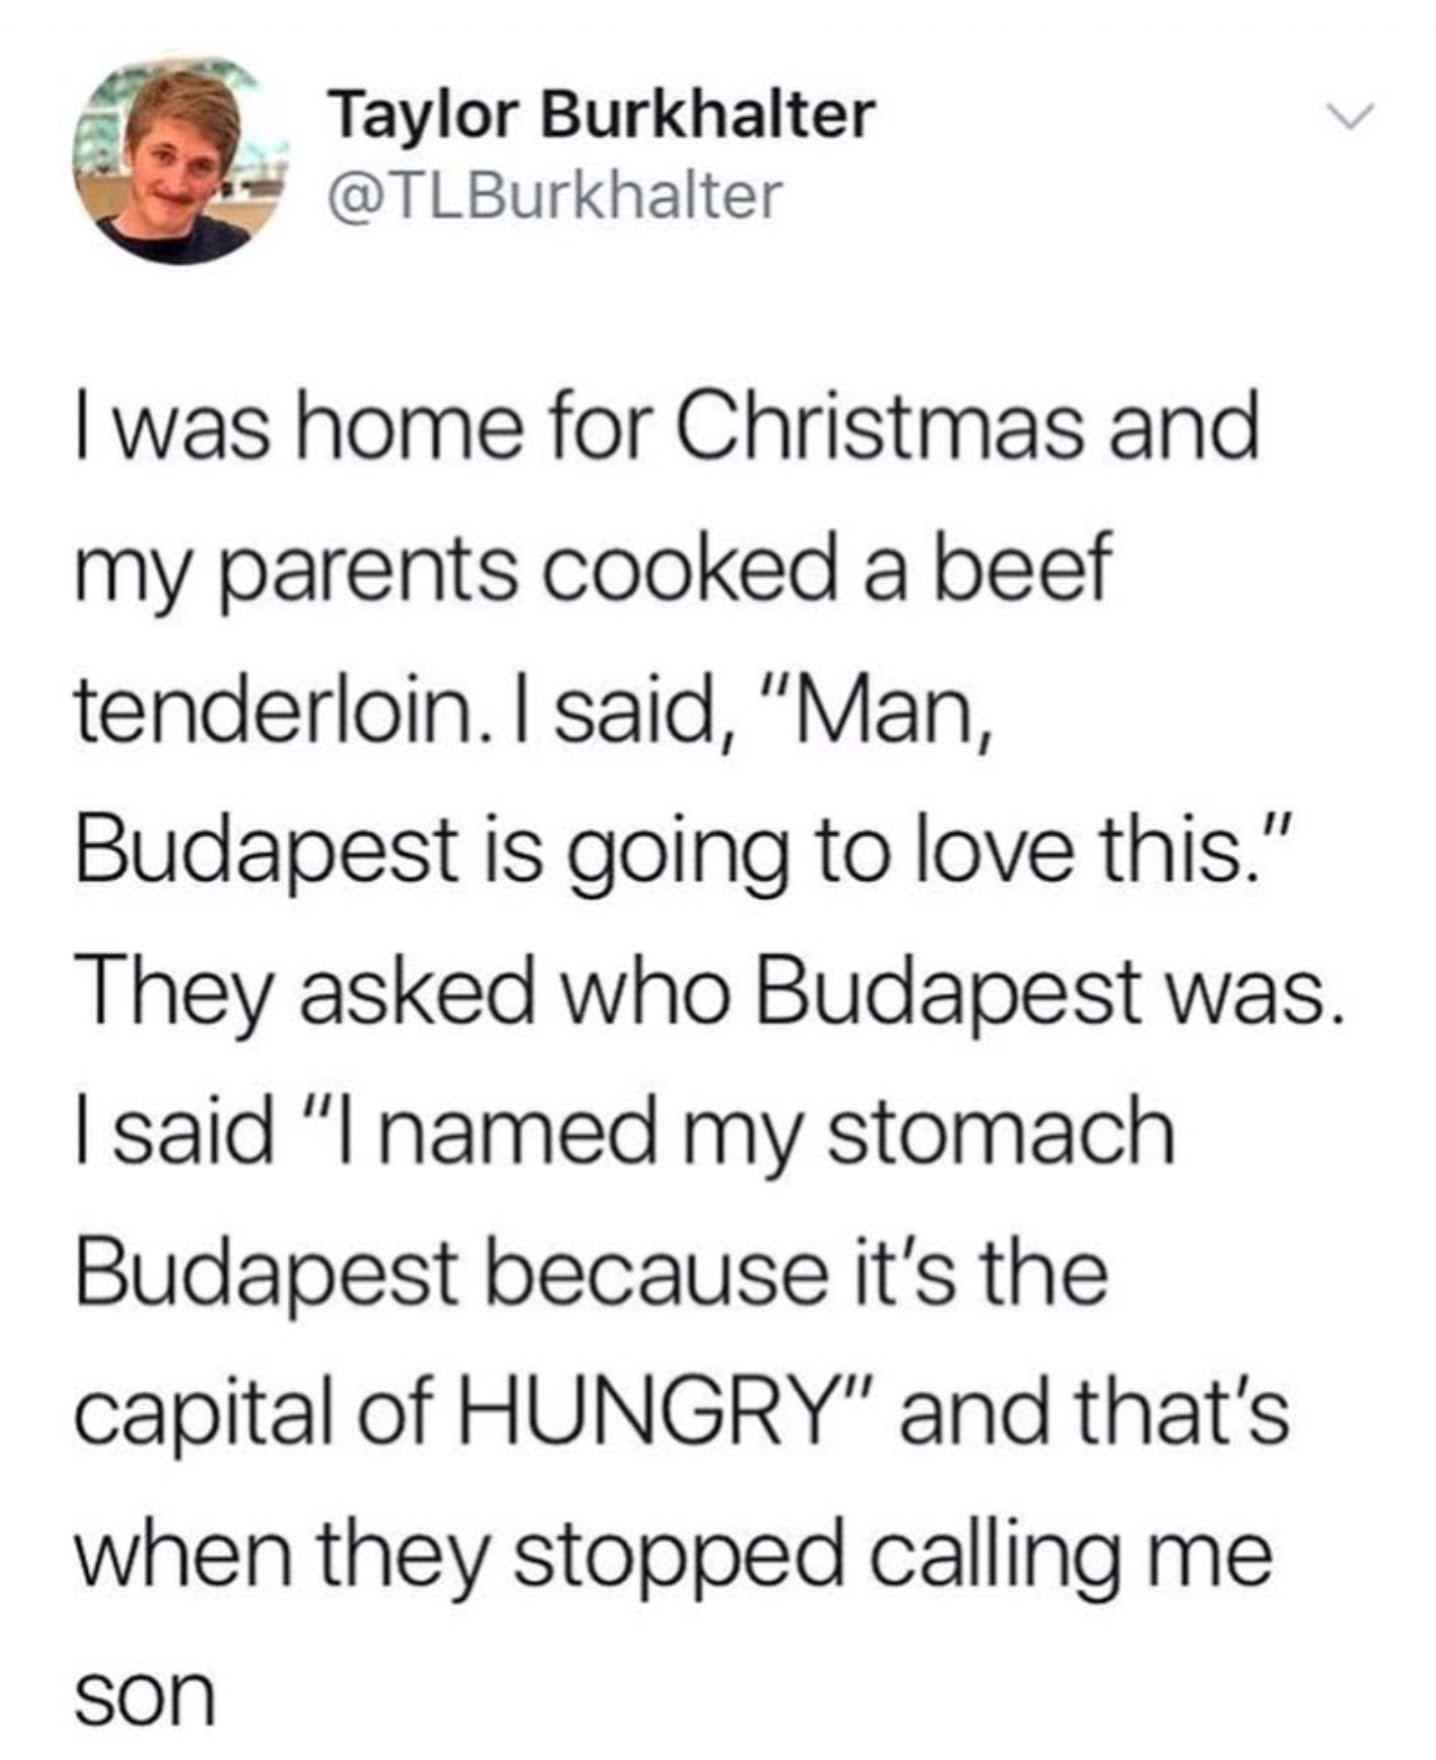 hungary pun - Taylor Burkhalter I was home for Christmas and my parents cooked a beef tenderloin. I said, "Man, Budapest is going to love this." They asked who Budapest was. I said "I named my stomach Budapest because it's the capital of Hungry" and that'